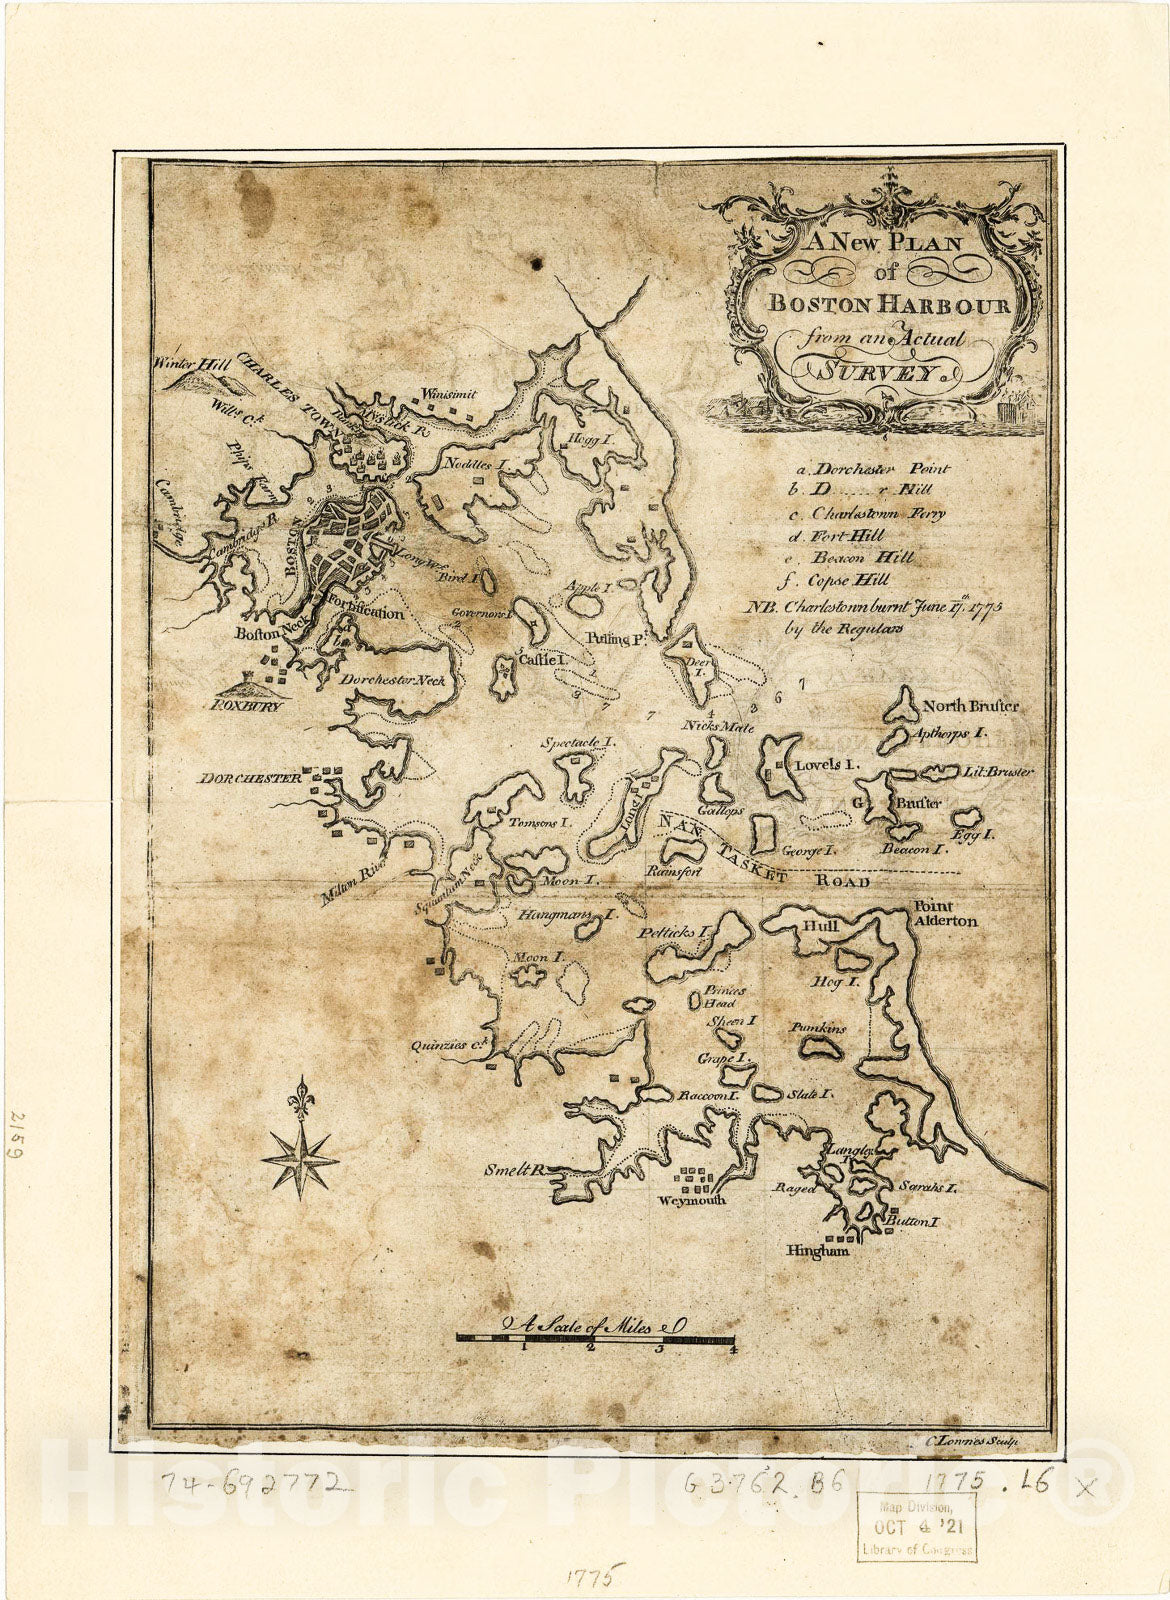 Historic 1775 Map - A New Plan of Boston Harbour from an Actual Survey.